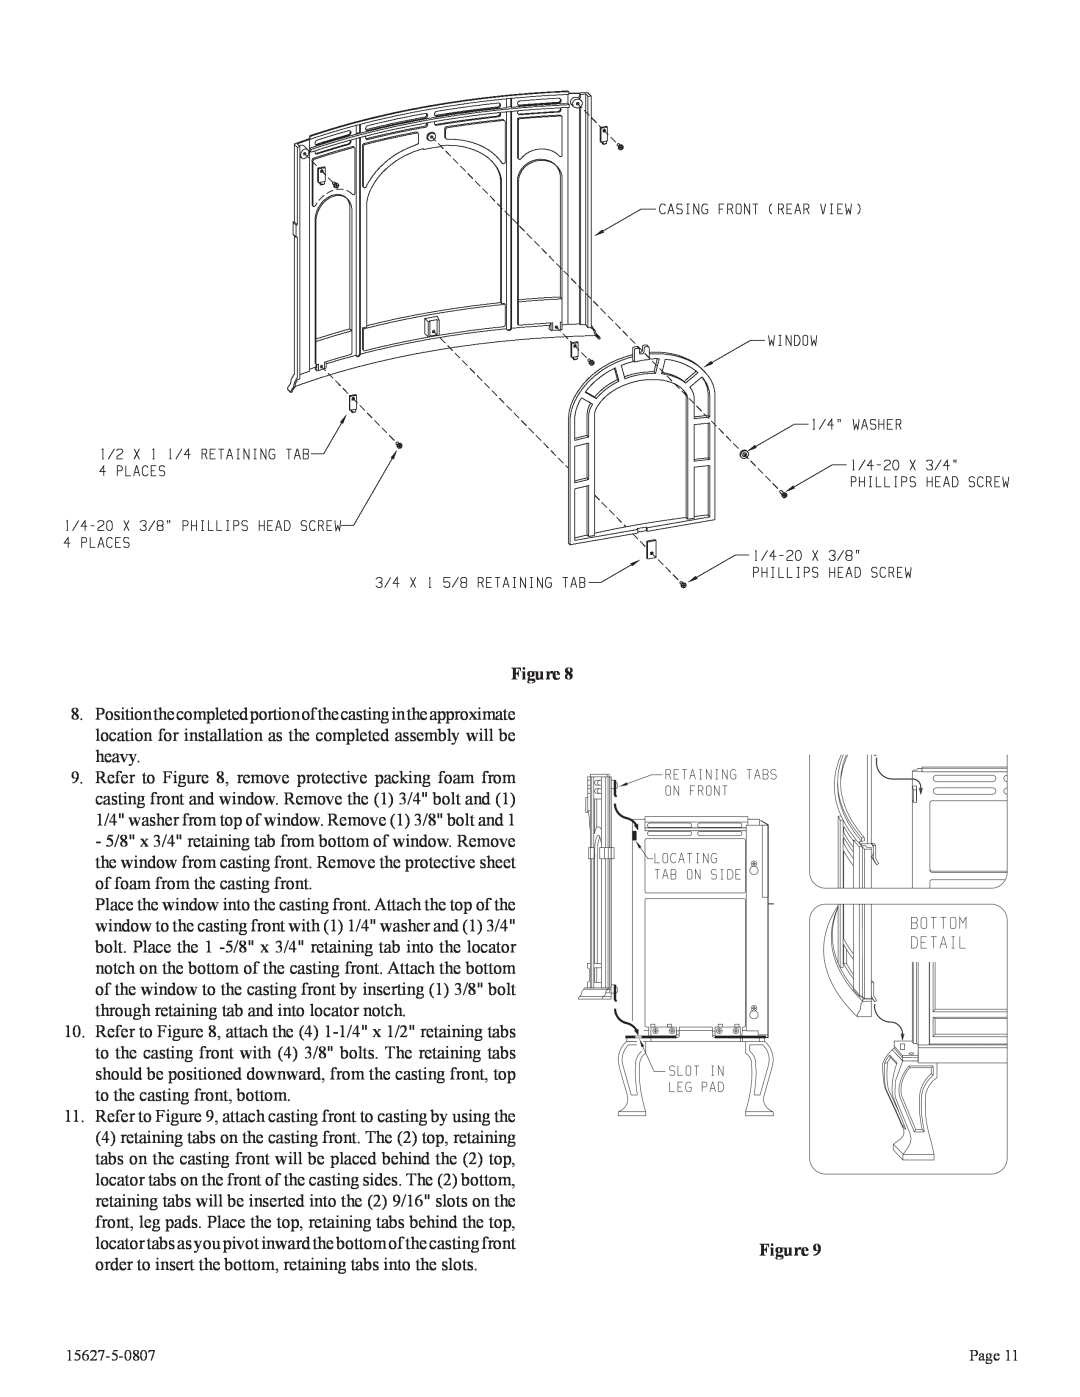 Empire Comfort Systems CIBV-30-20 installation instructions Refer to , attach casting front to casting by using the 